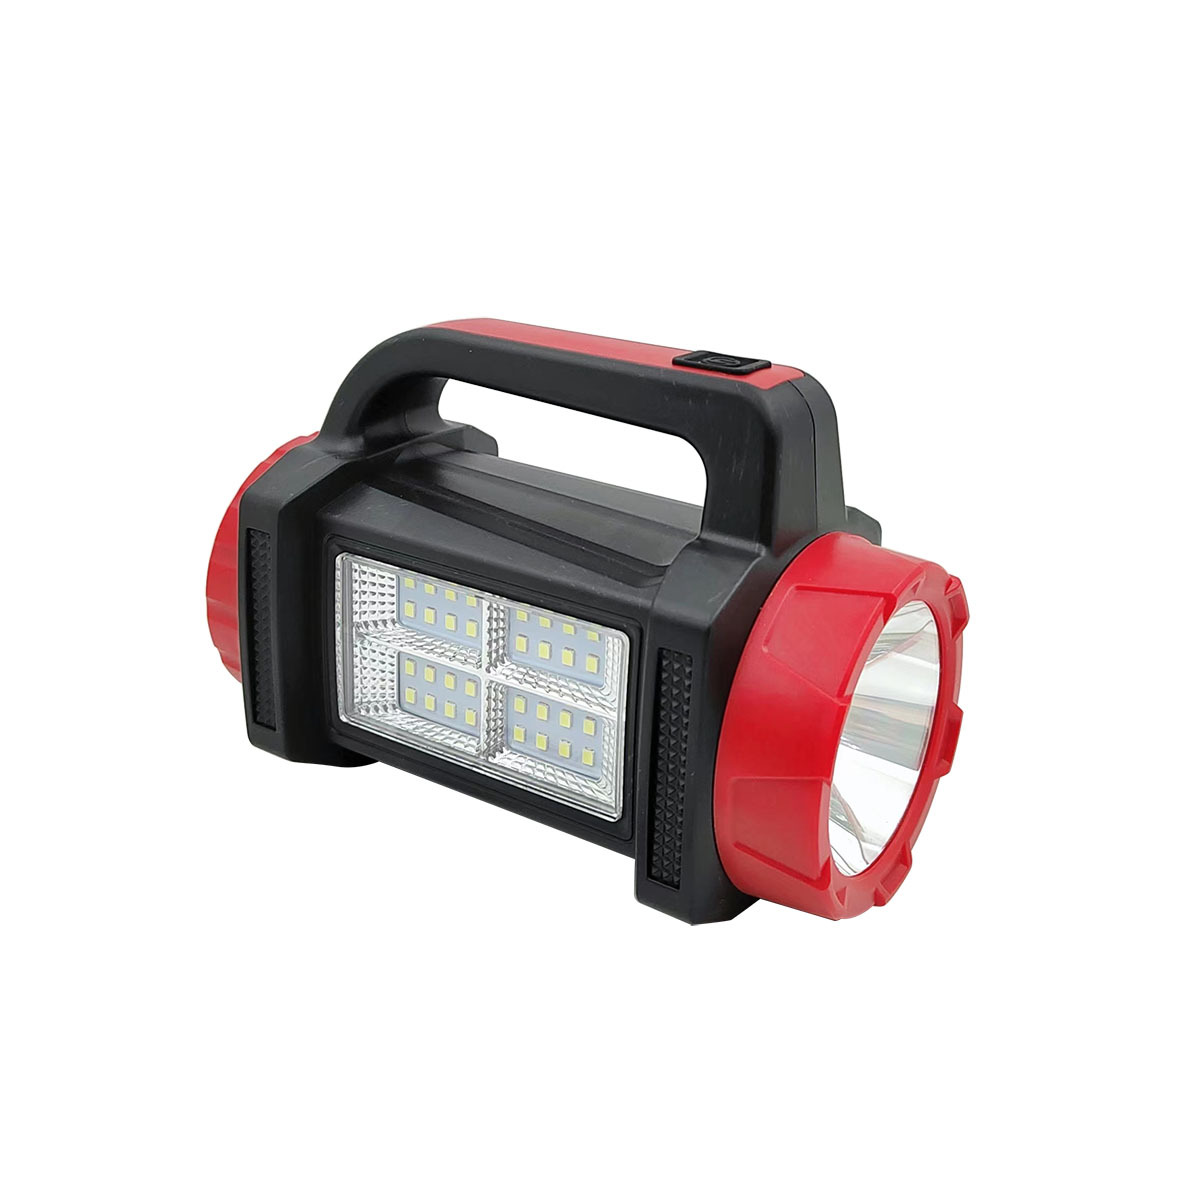 New Multifunctional Outdoor Solar Portable Lamp Multi-Gear Light LED/Cob with Output Emergency Light Camping Lantern